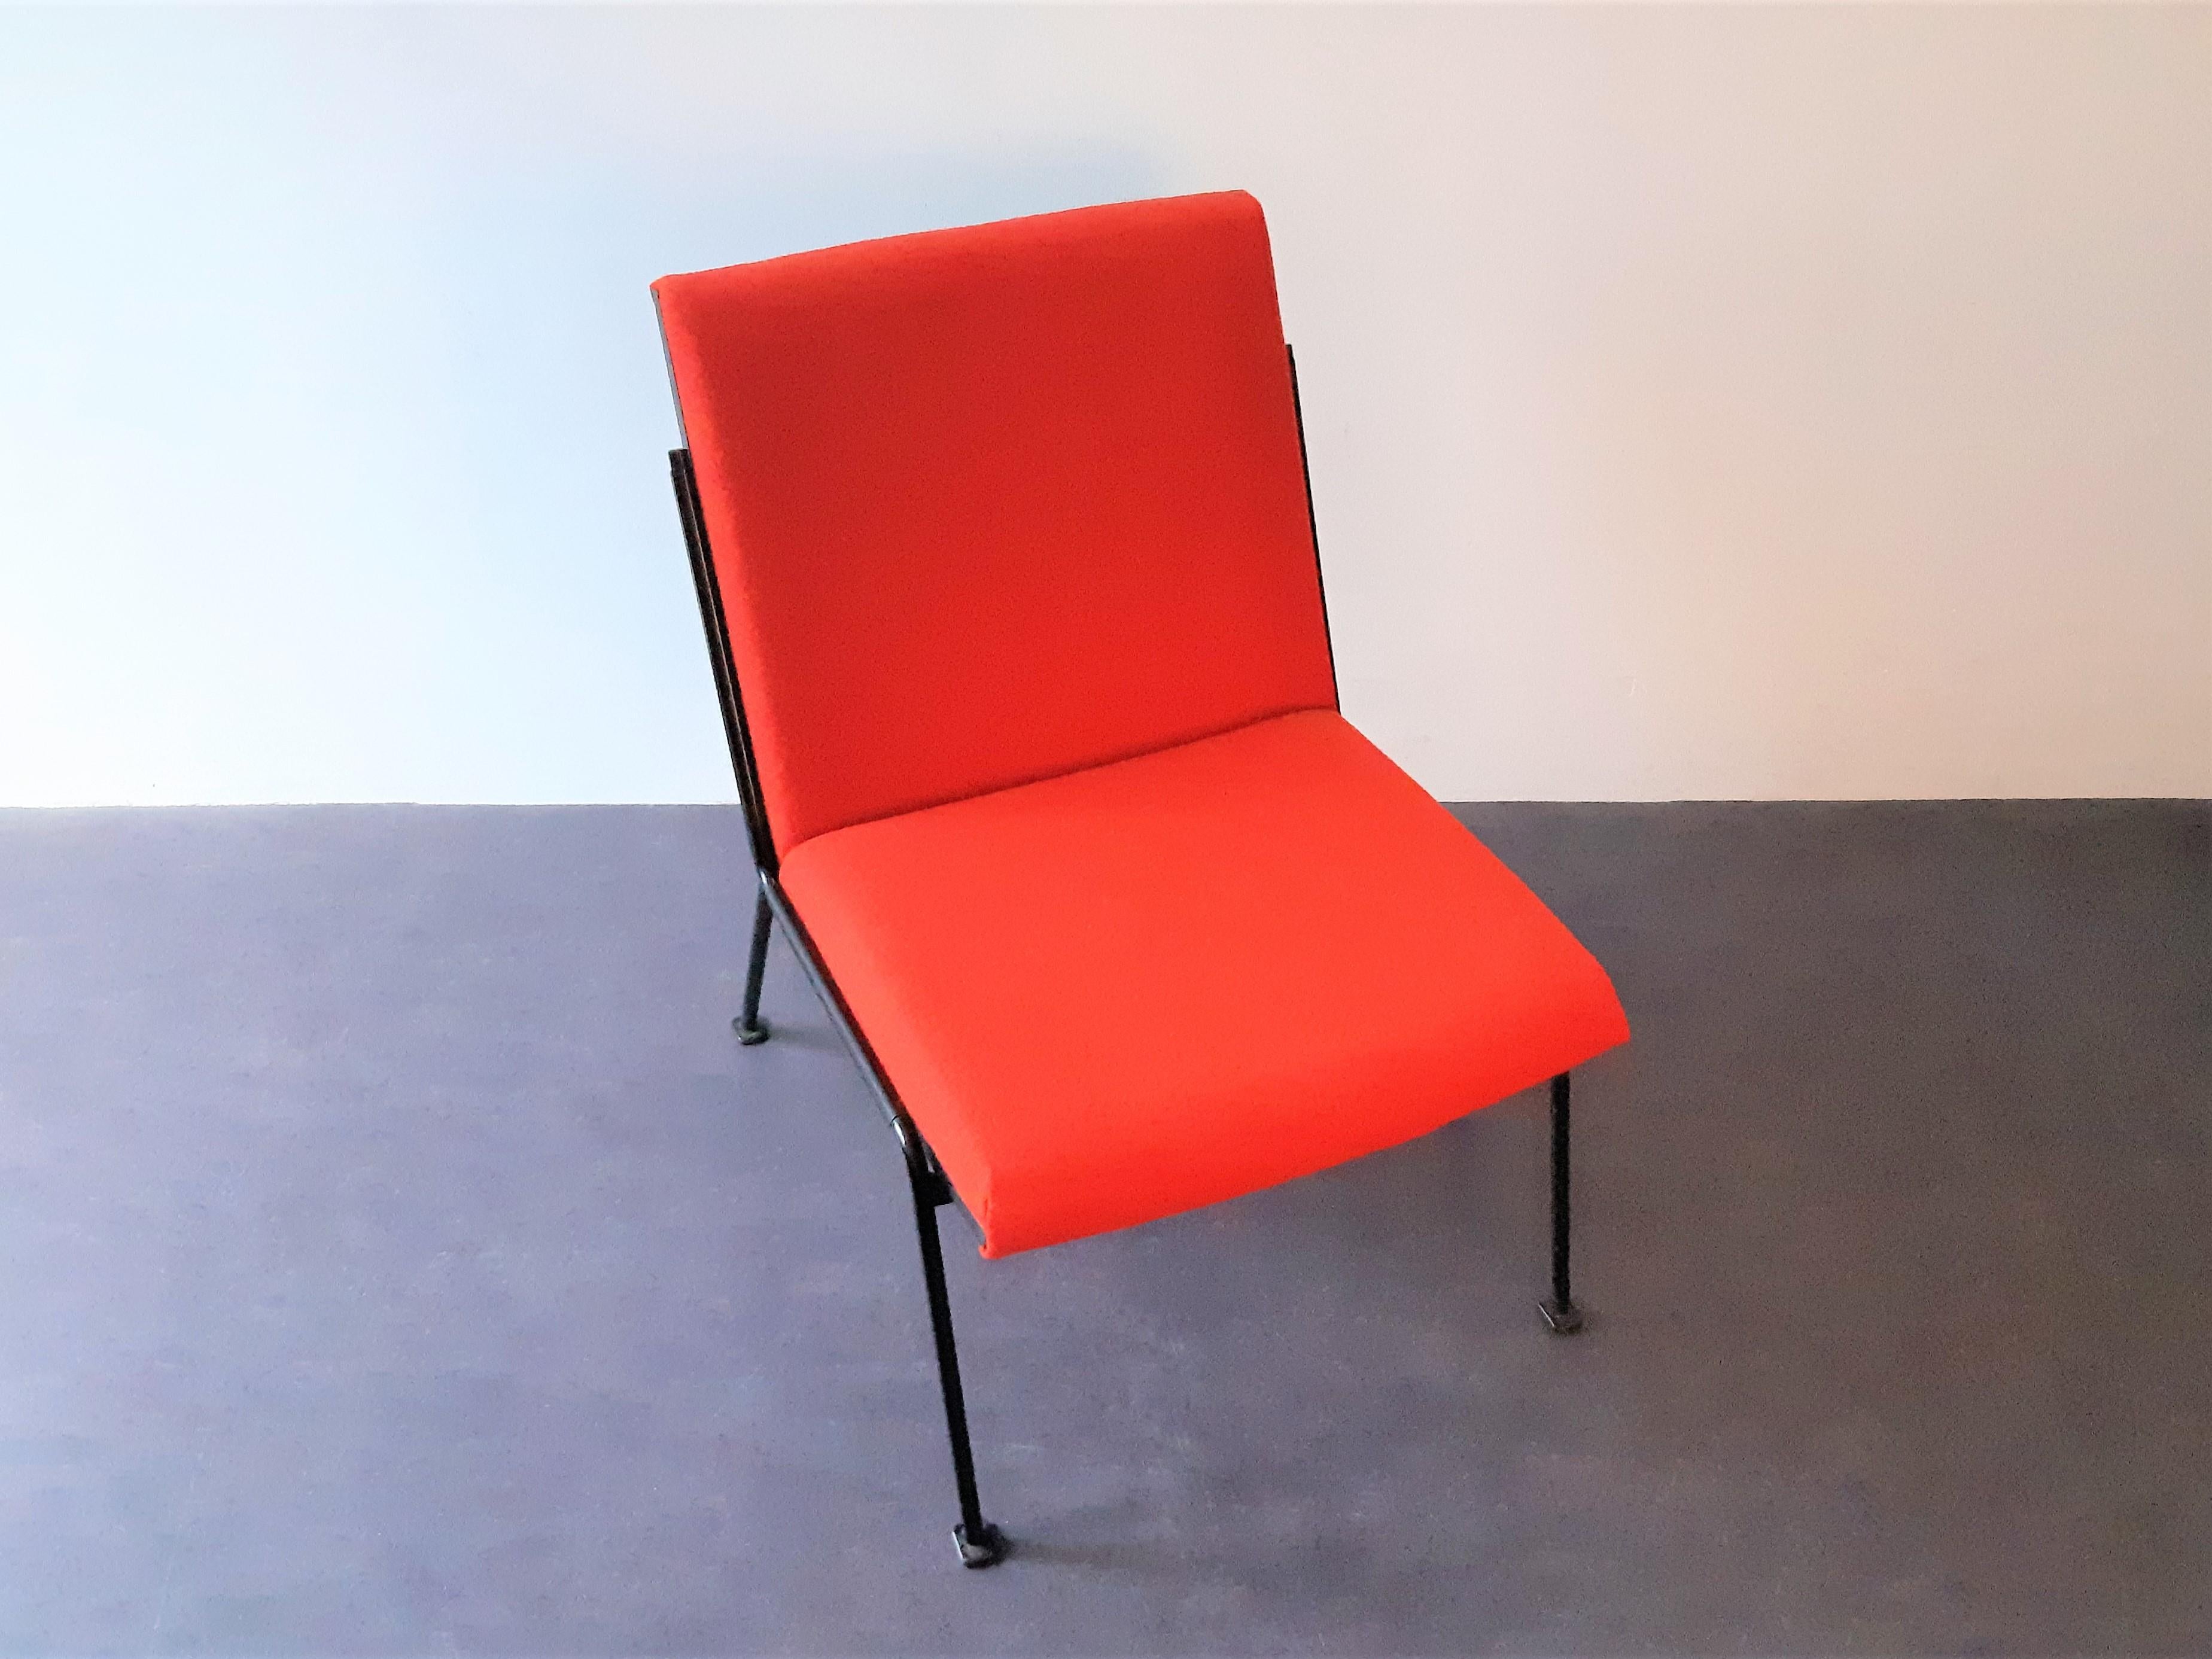 The Oase lounge chair was designed by Wim Rietveld for Ahrend de Cirkel in 1958, and gained the Signe d'Or price in 1959. A beautiful piece of Dutch design! This chair is newly upholstered in a beautiful red Kvadrat fabric (Tonus 4, color 608) and